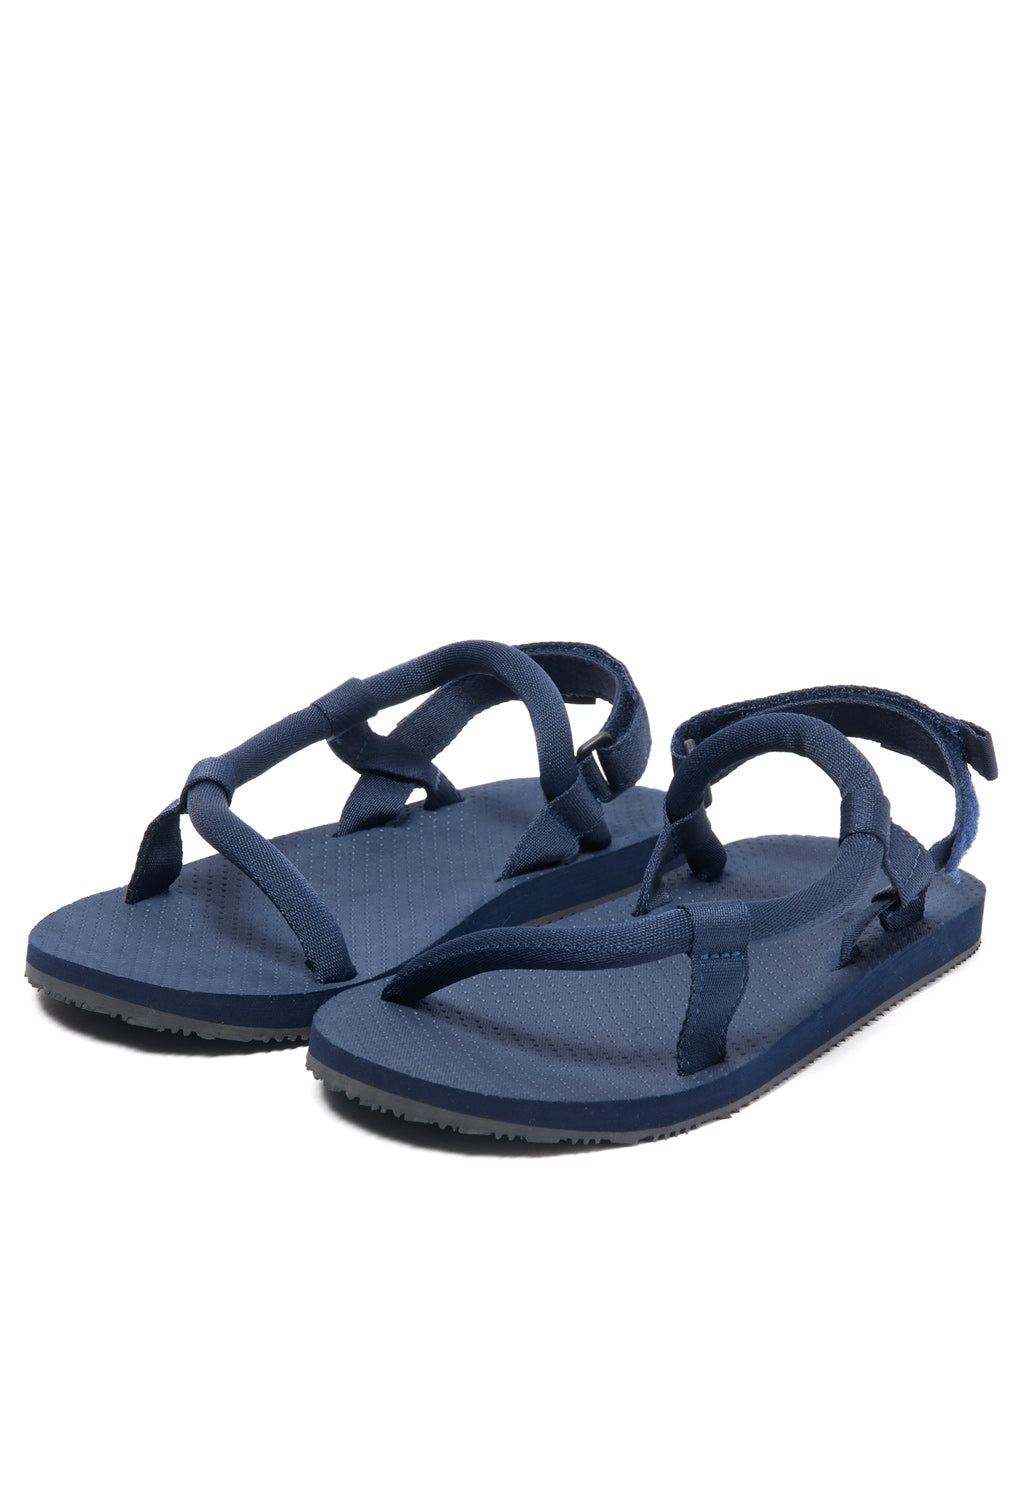 Montbell Lock-On Sandals - Navy